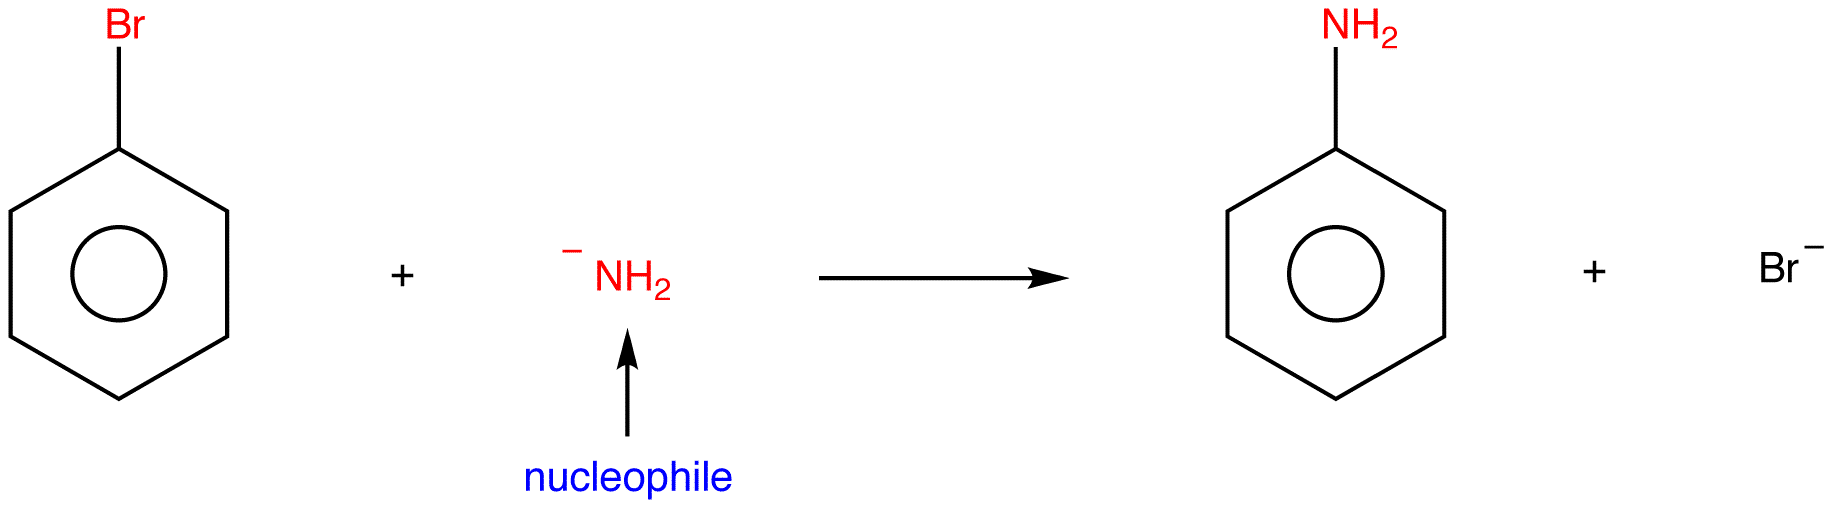 nucleophilicaromaticsubstitution2.png